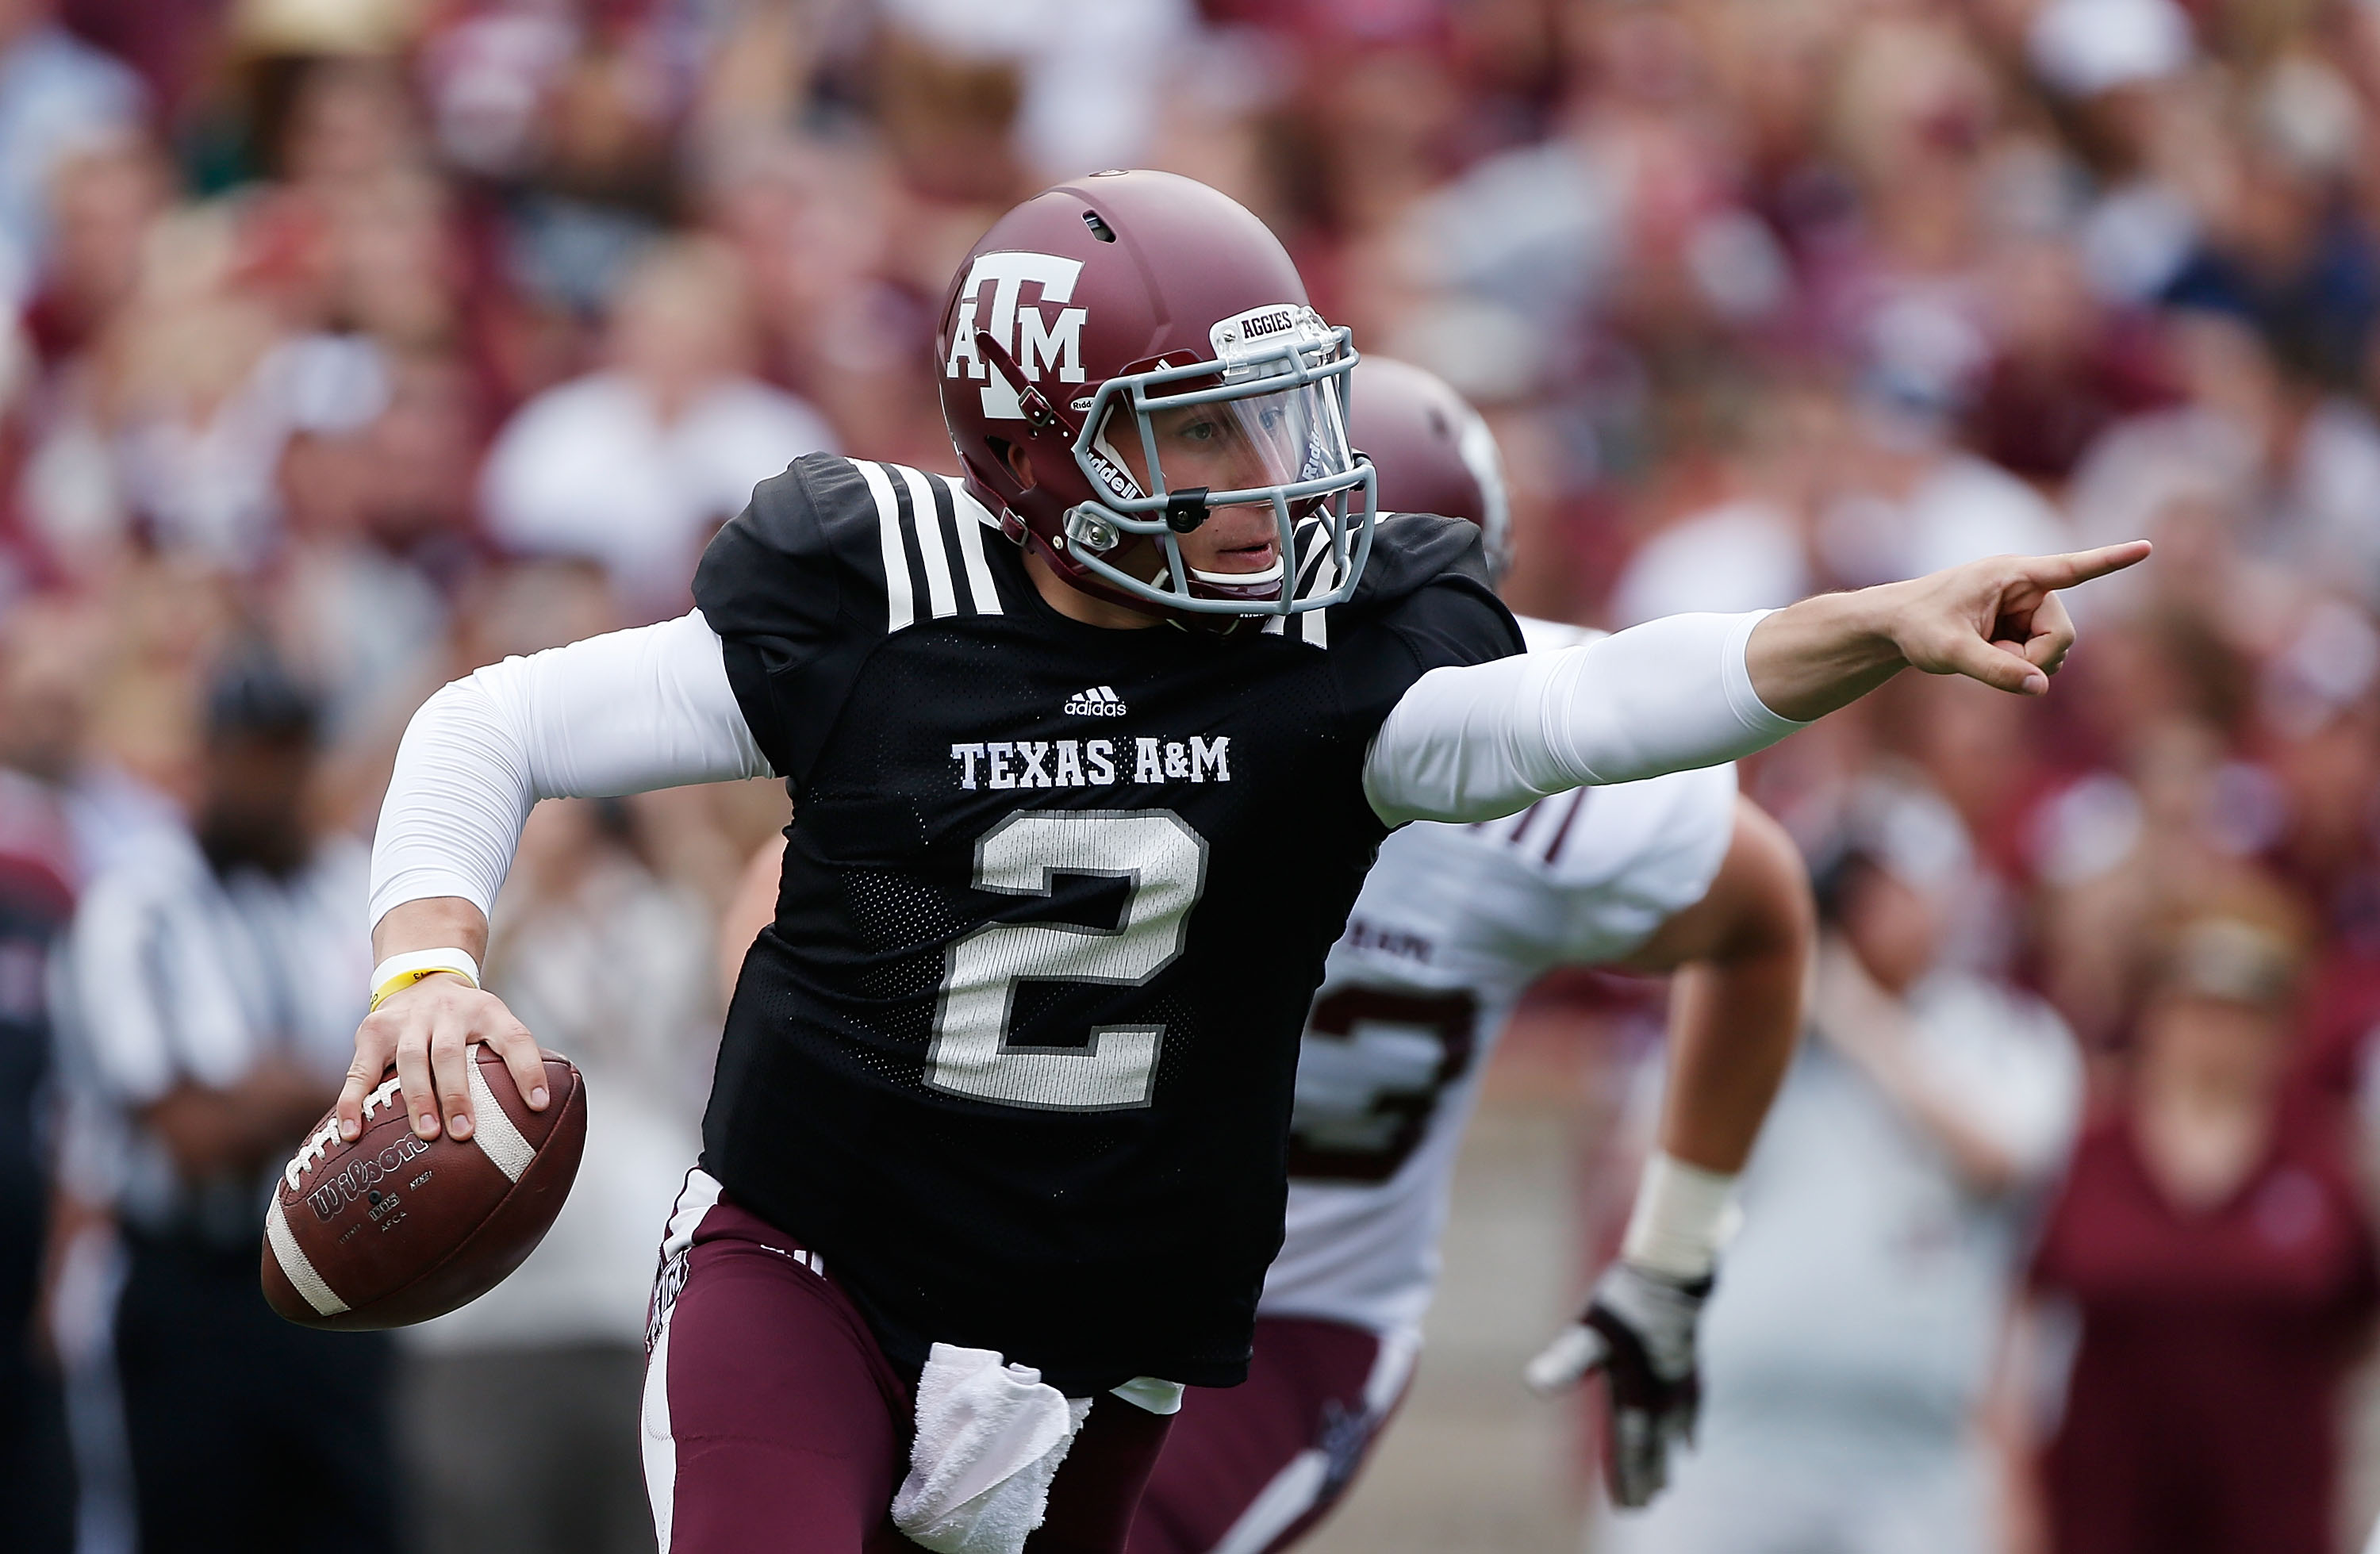 Texas A&;M quarterback Johnny Manziel #2 looks to pass at Kyle Field on April 13, 2013 in College Station, Texas. (Photo by Scott Halleran/Getty Images)